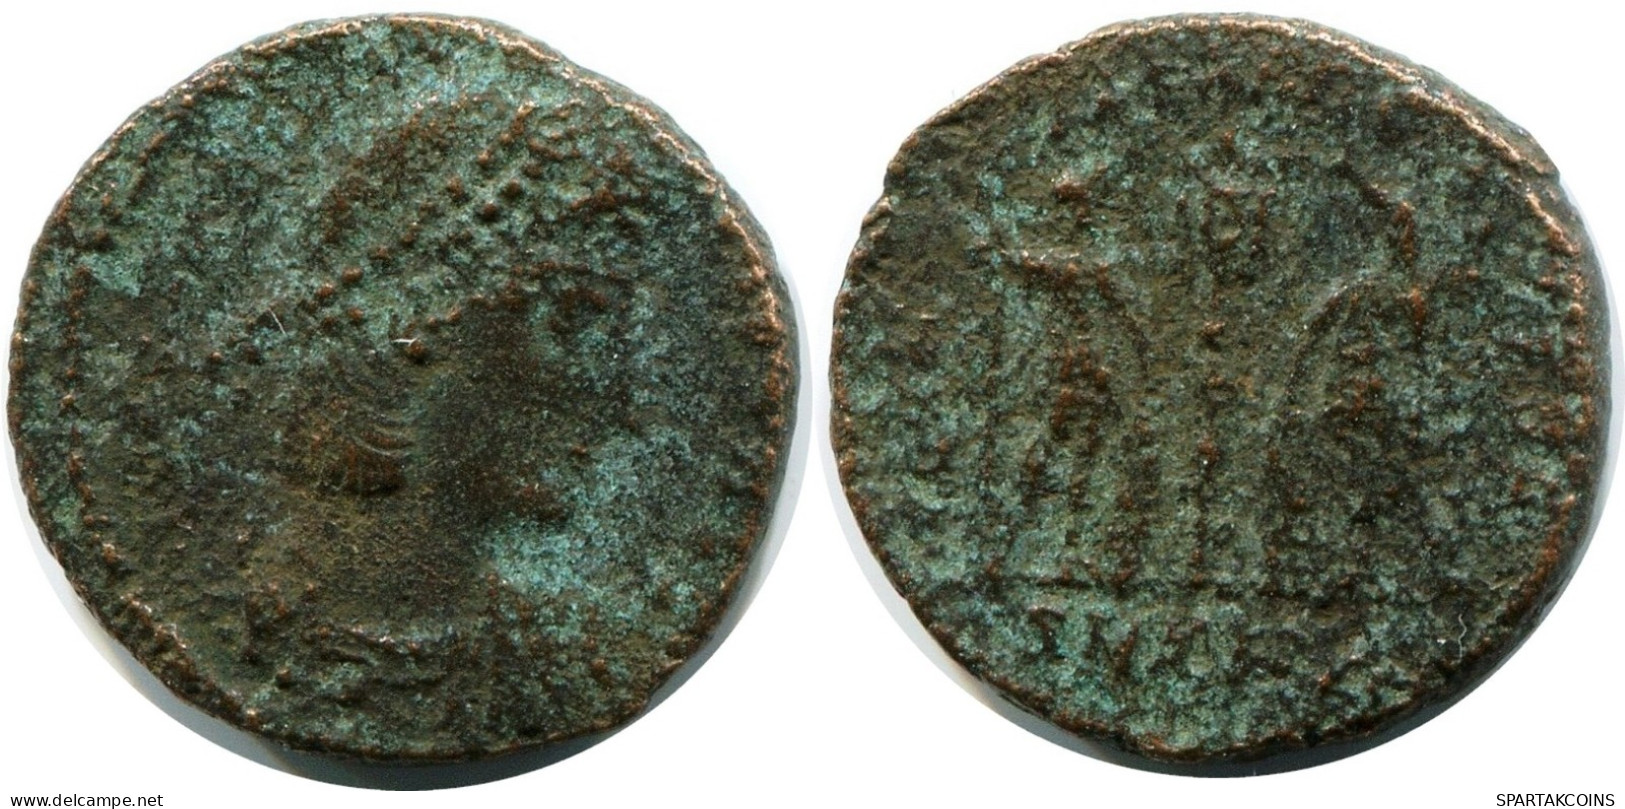 ROMAN Pièce MINTED IN ANTIOCH FROM THE ROYAL ONTARIO MUSEUM #ANC11279.14.F.A - El Imperio Christiano (307 / 363)